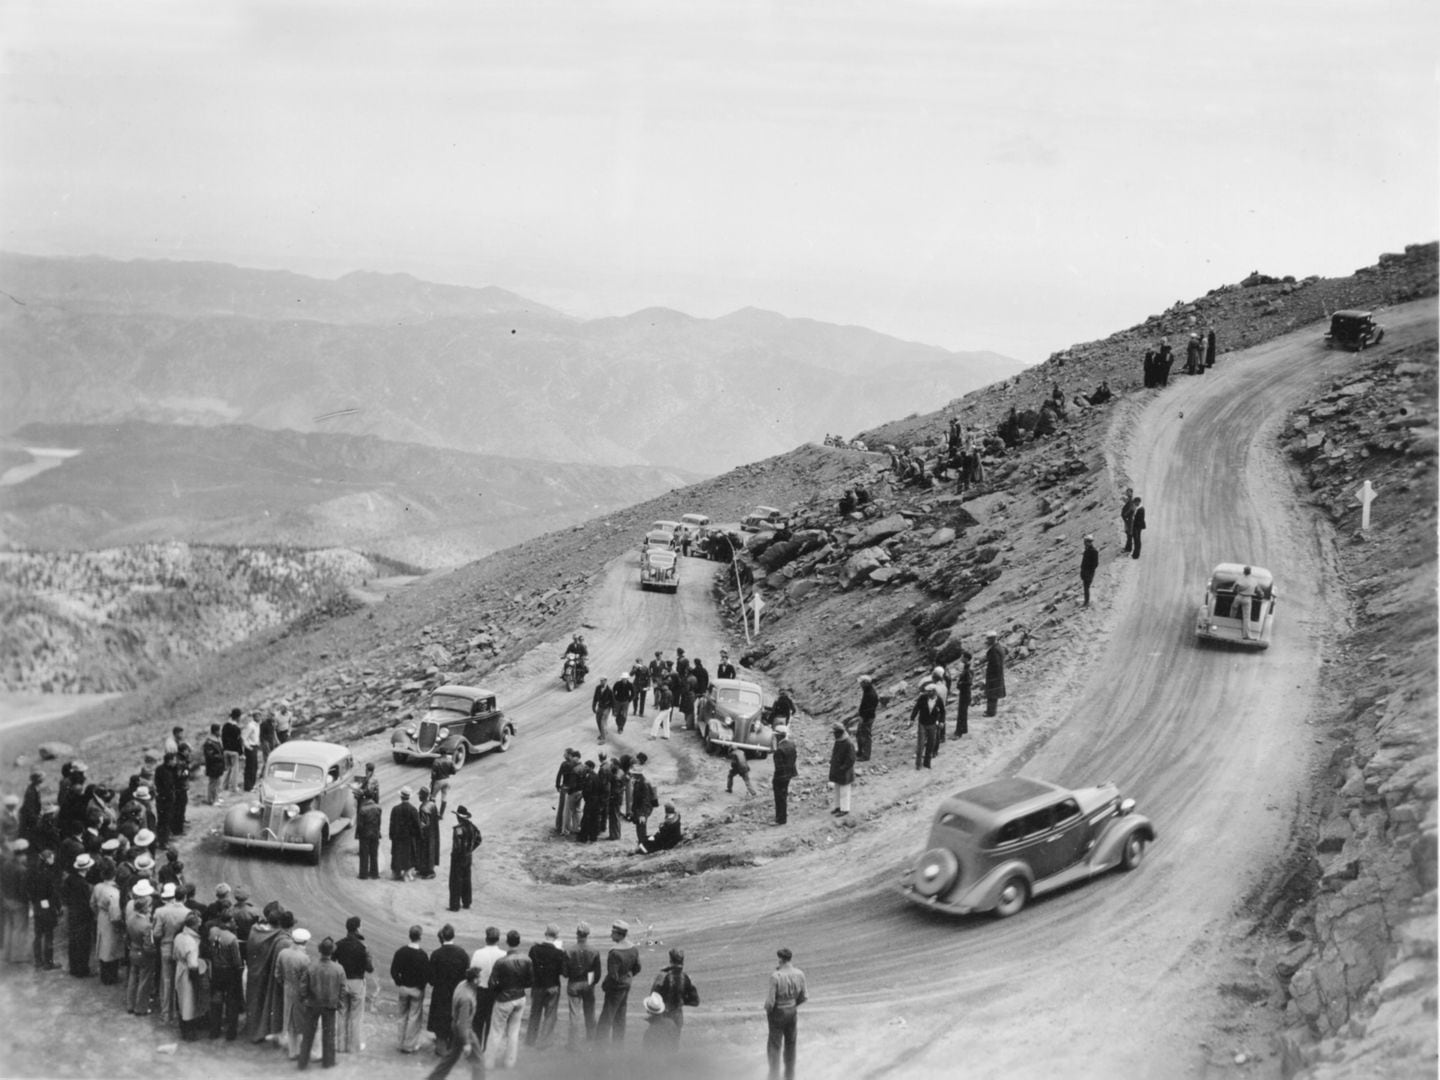 The Legend of the Pikes Peak Hill Climb Motorcyclist